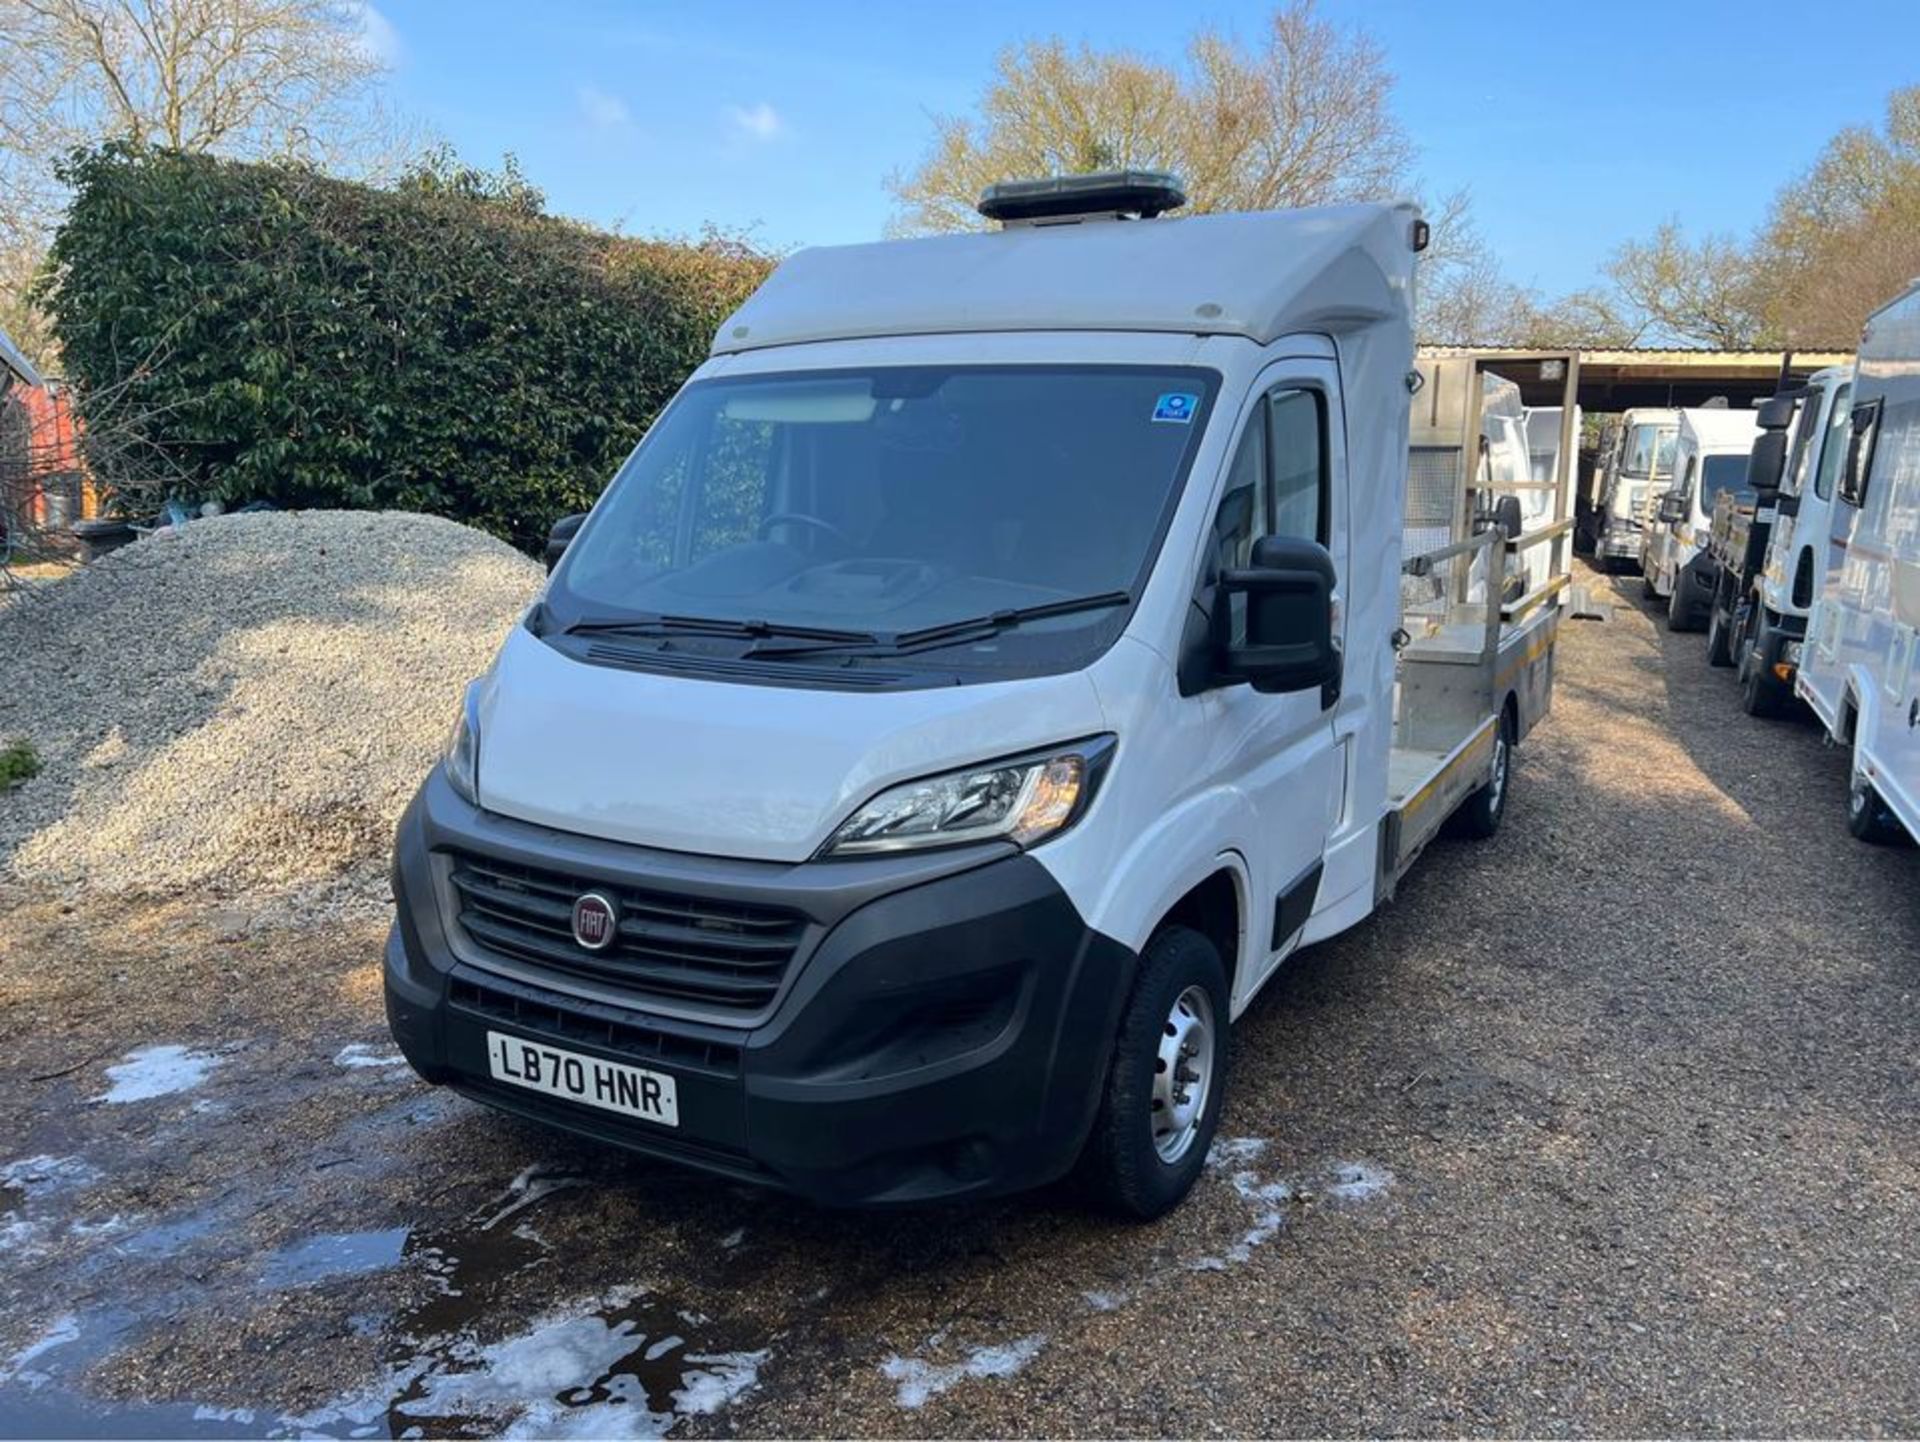 2021, FIAT Ducato - 2.3 TD, Low Load E6 Dropside Traffic Management Truck - Image 3 of 10